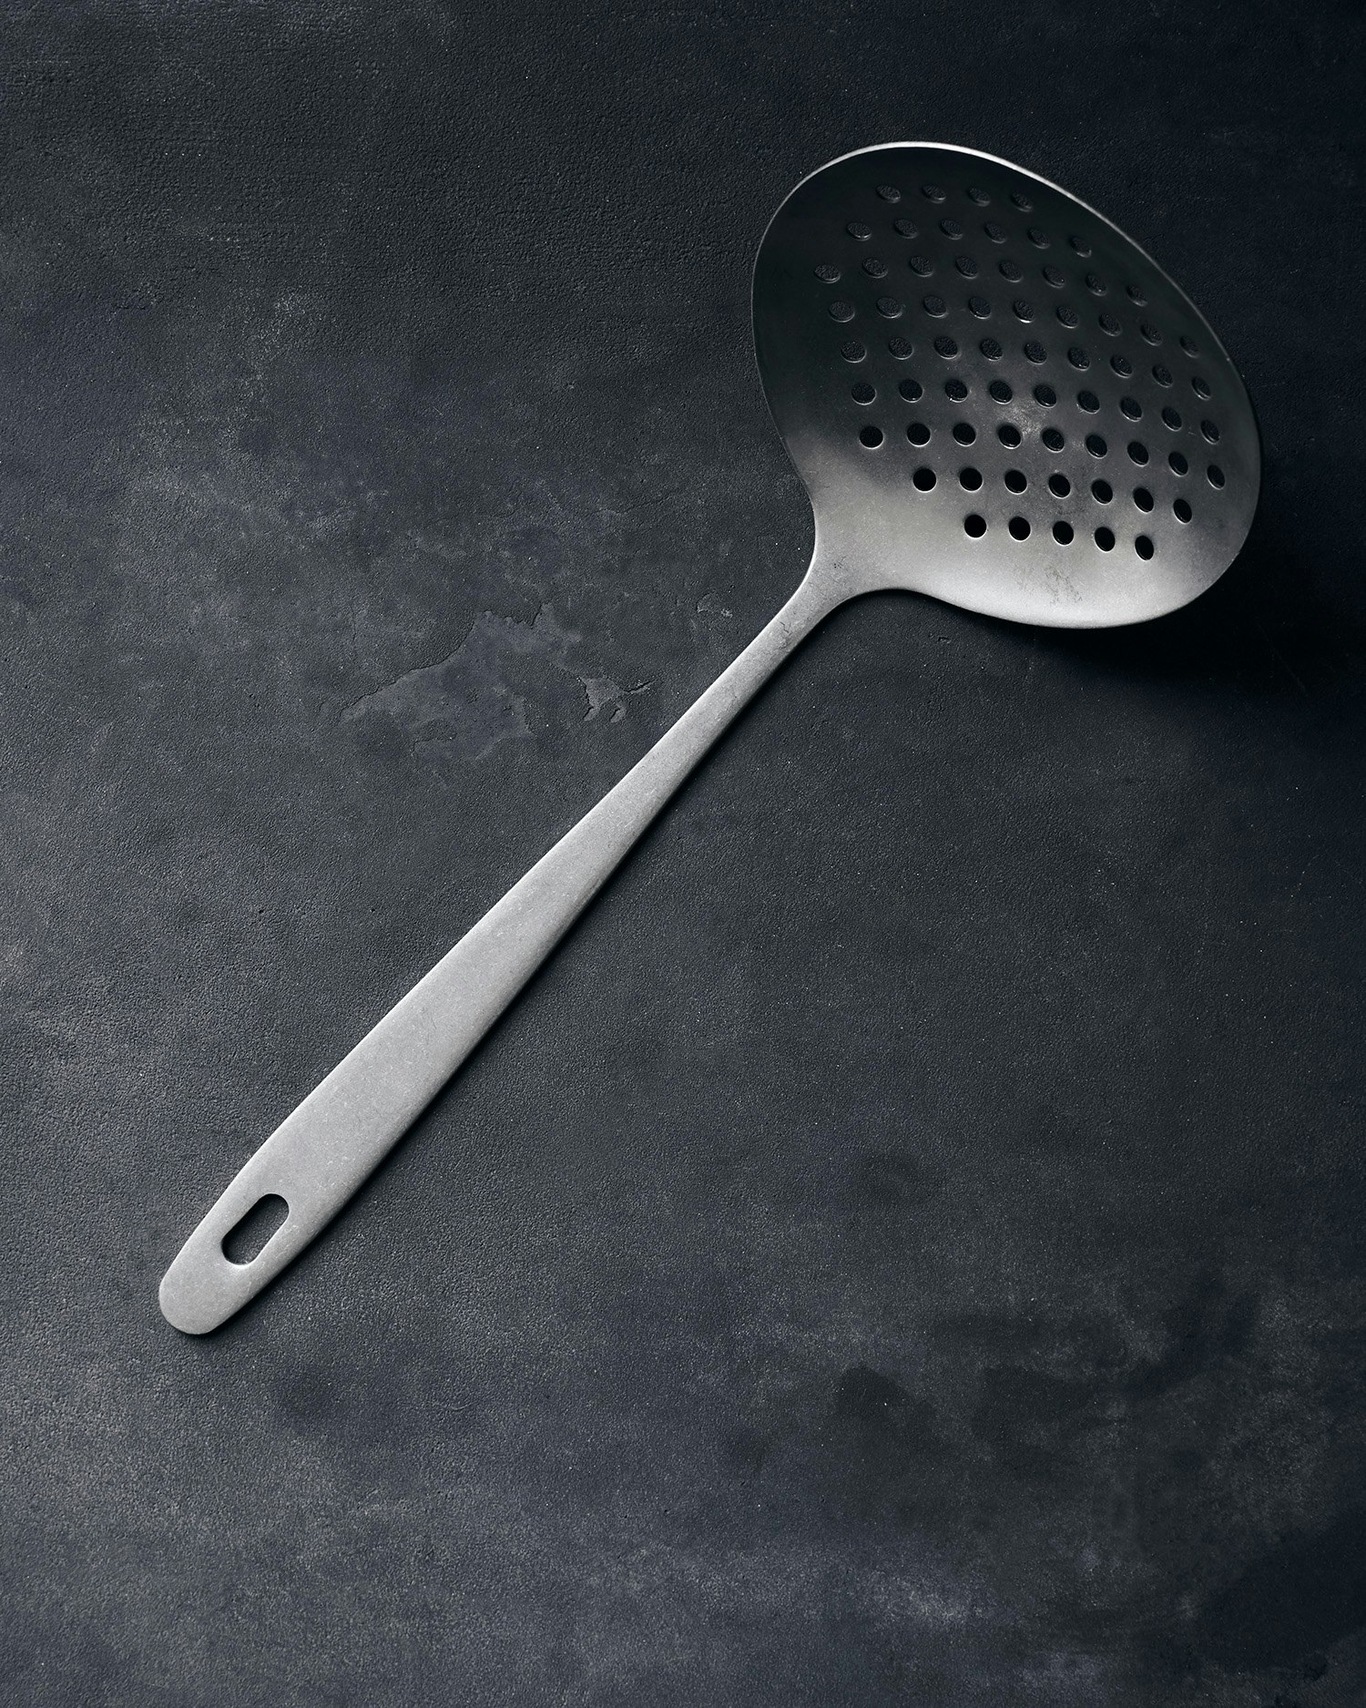 House Doctor - Slotted Spoon - Silver